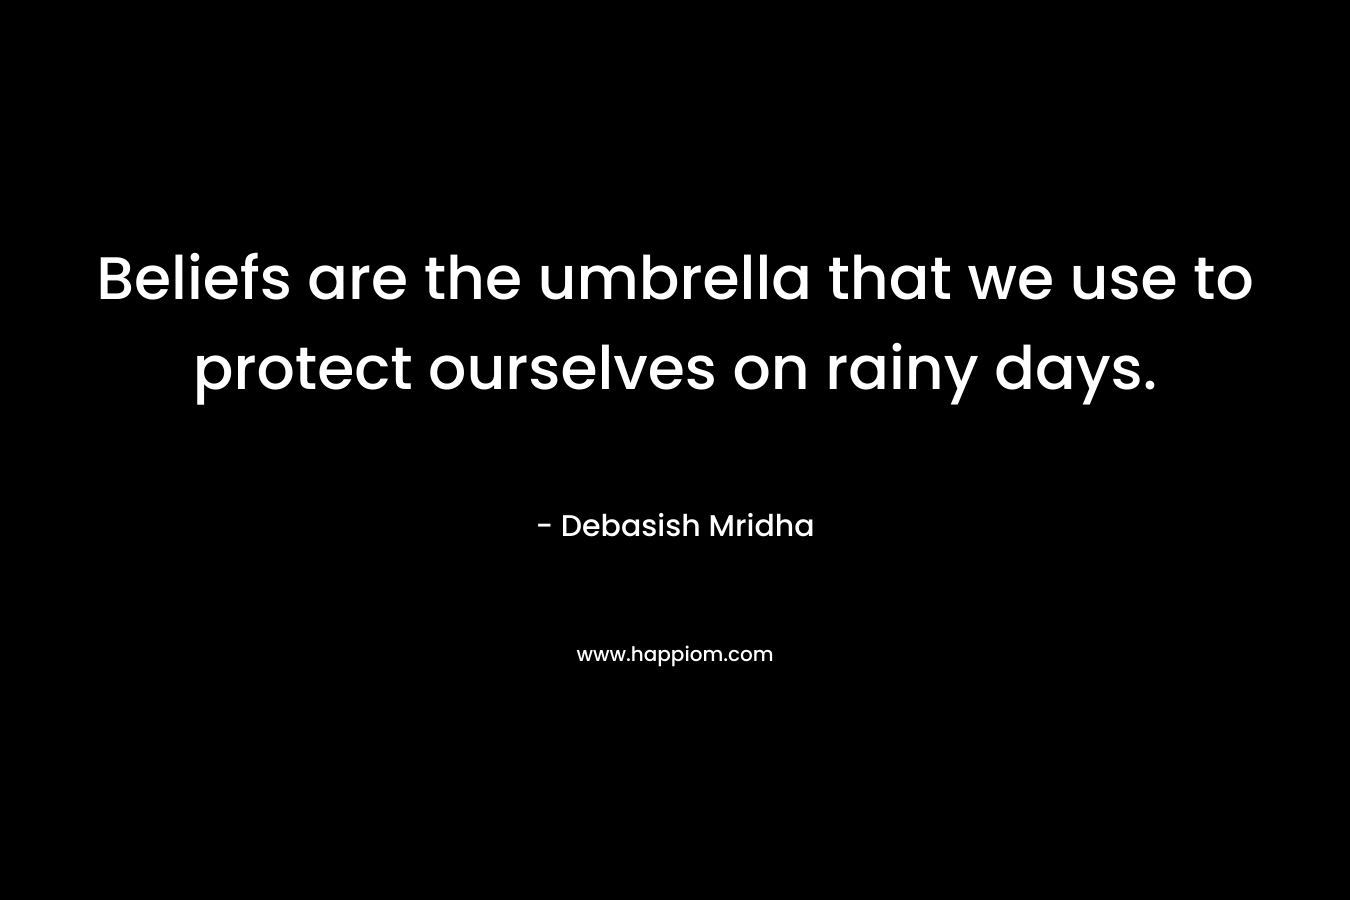 Beliefs are the umbrella that we use to protect ourselves on rainy days.